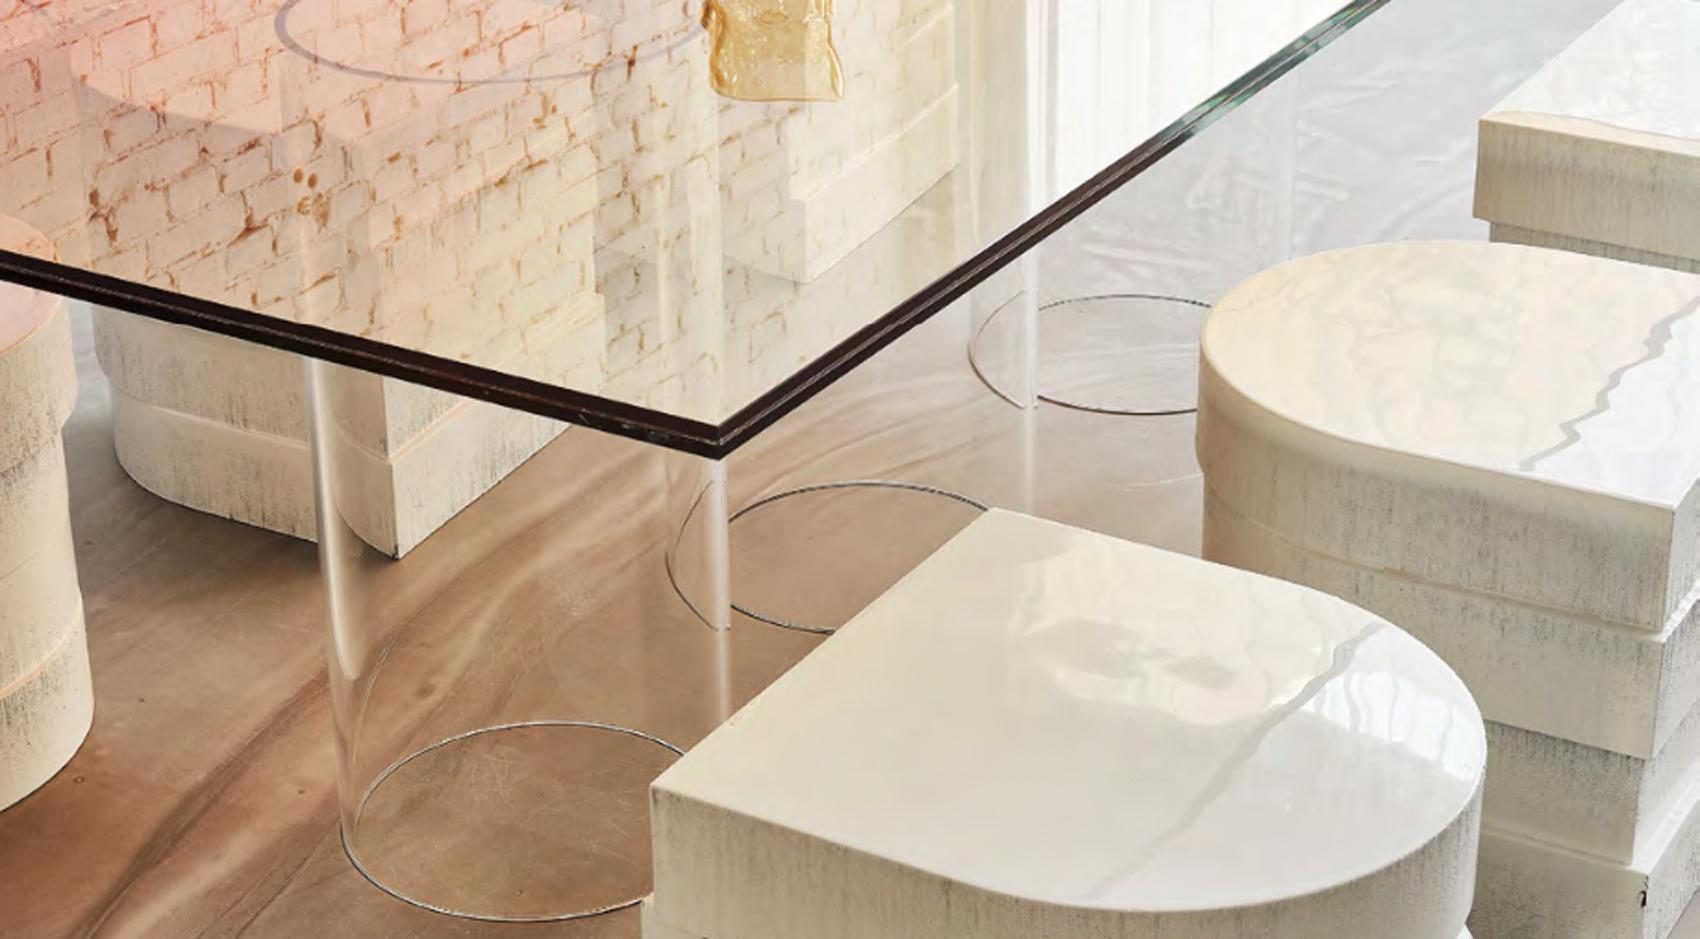 Glass table by Sabine Marcelis, 2021.